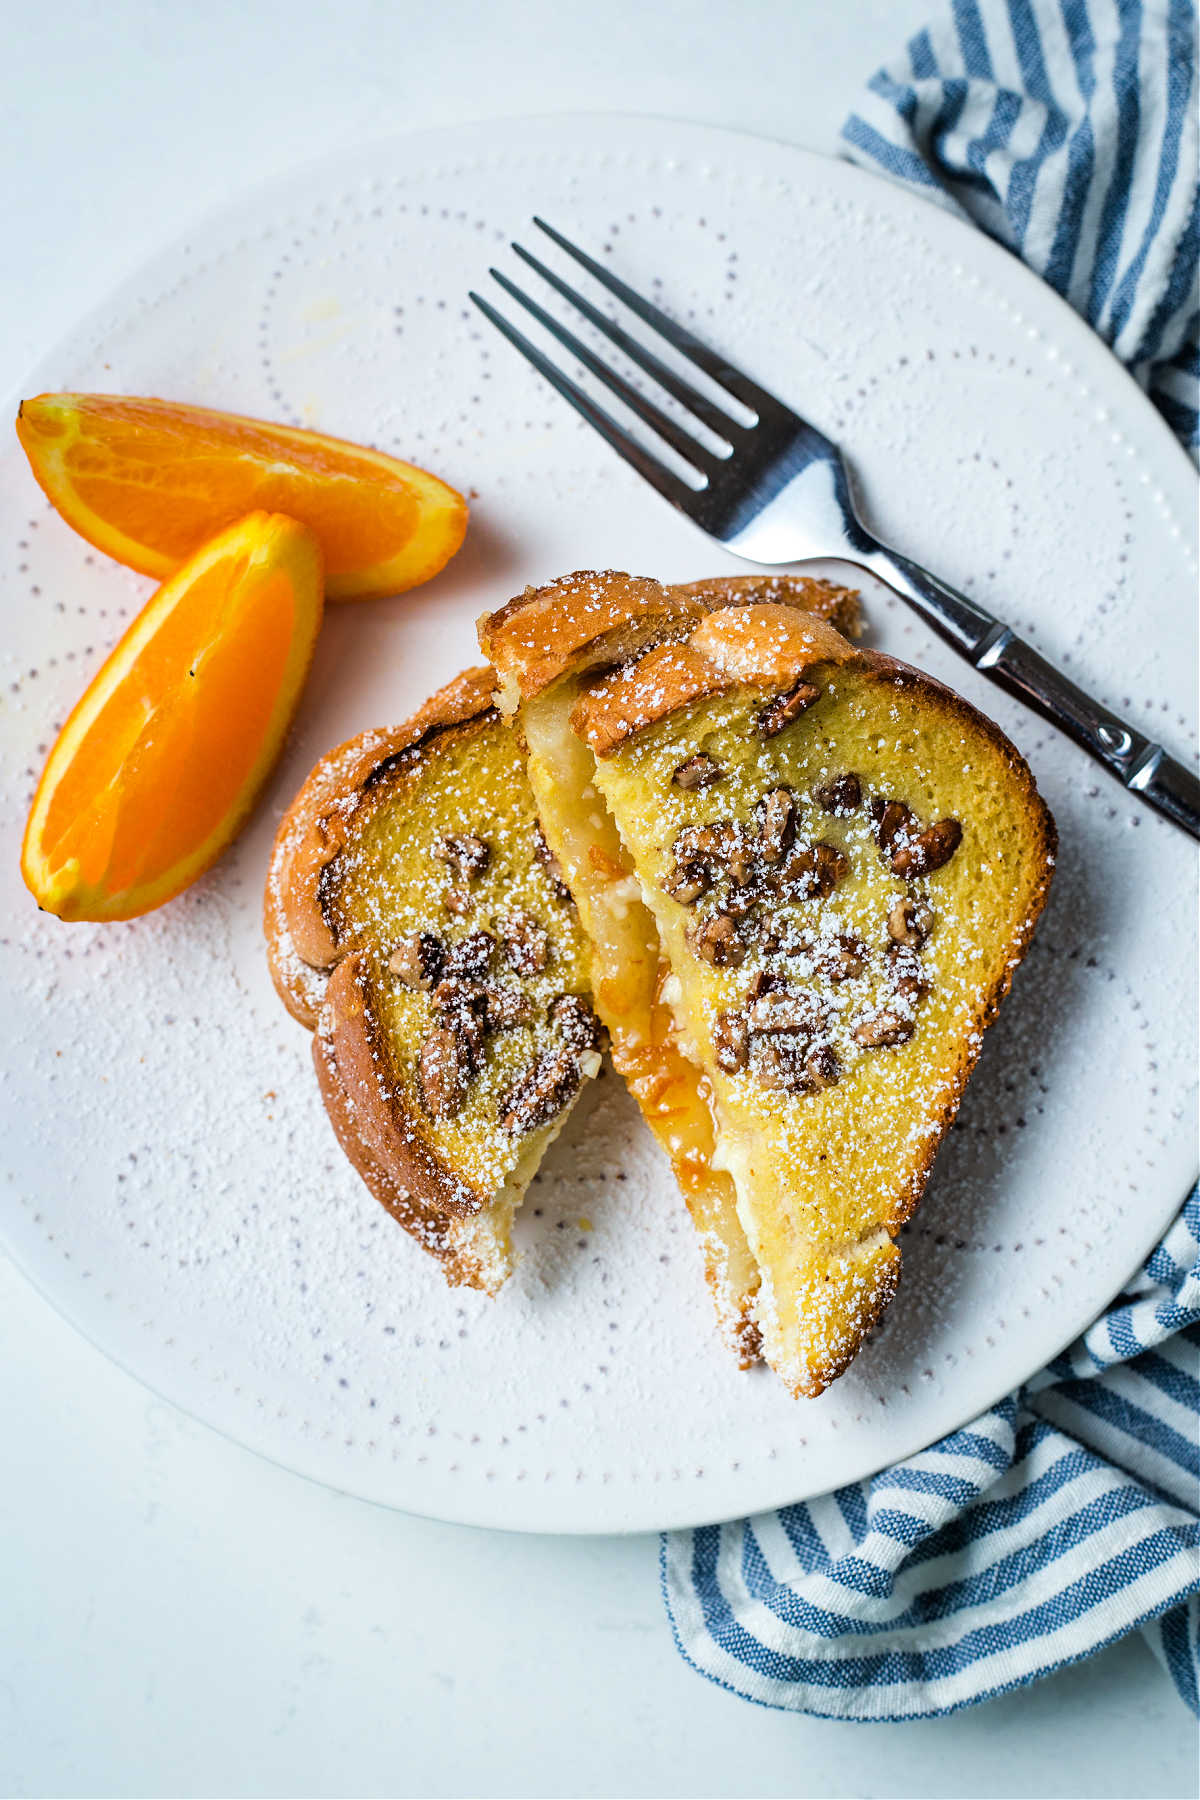 two slices of orange french toast with orange slice garnish on a white plate with a blue napkin and fork.